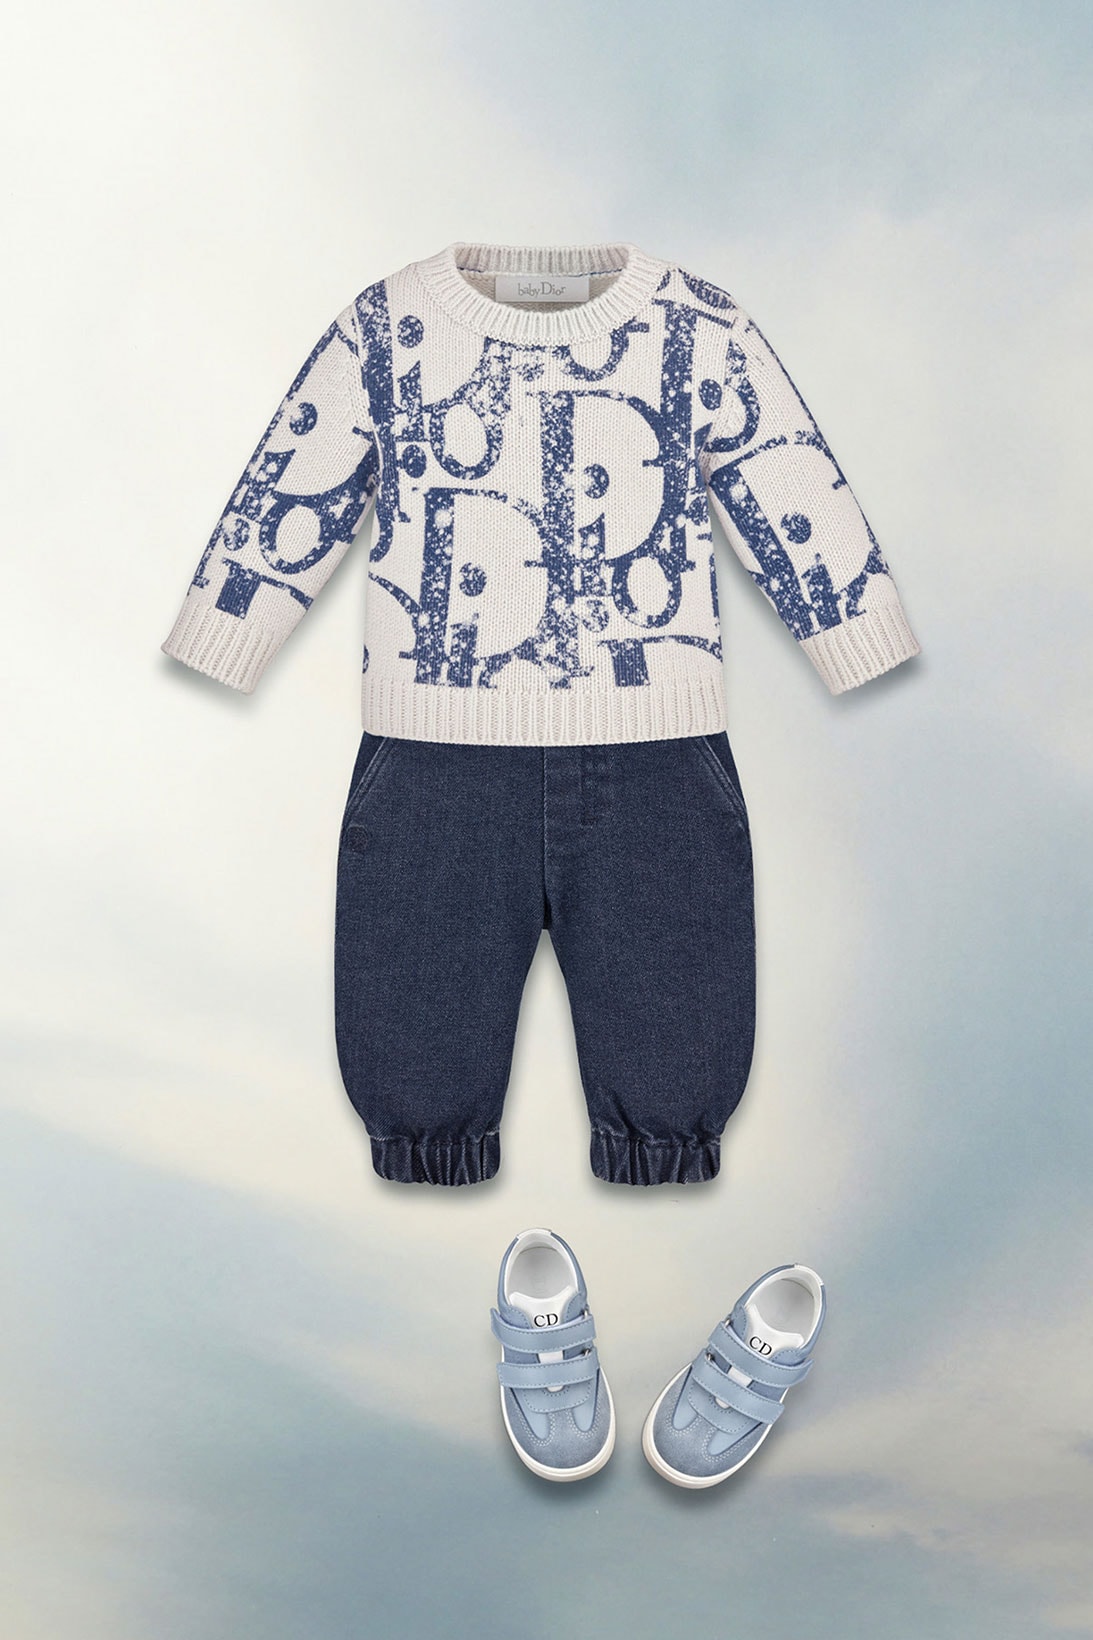 dior spring summer 2021 ss21 kids collection little girls toddlers logo sweater pants